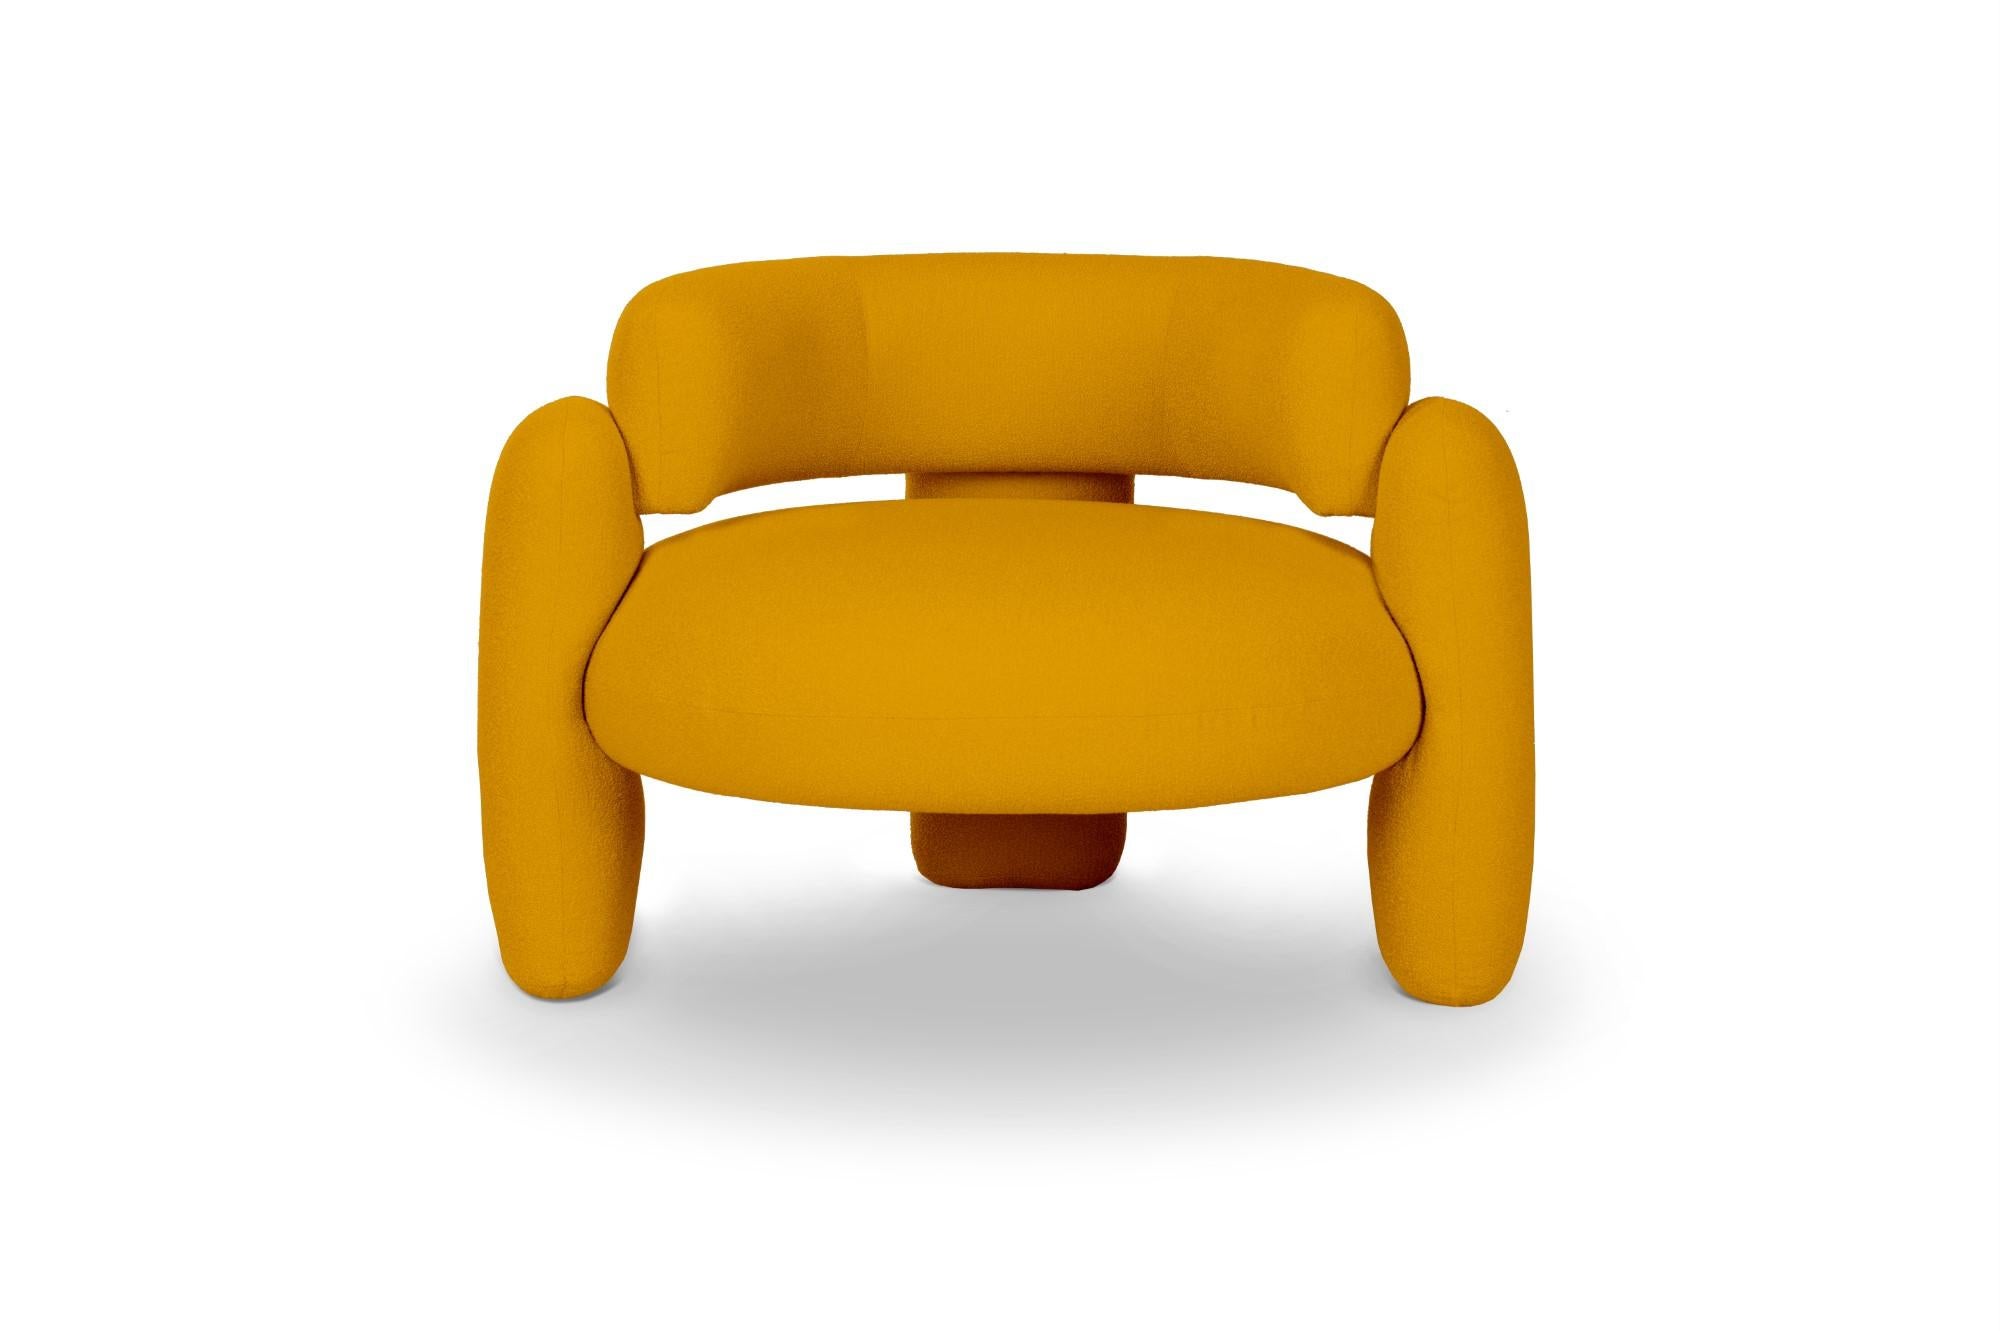 Embrace Lago Carcuma armchair by Royal Stranger 
Dimensions: W 96 x D 85 x H 68 cm.
Different upholstery colors and finishes are available.
Materials: Upholstery.

Featuring an enfolding composition of geometrical shapes, the Embrace Armchair